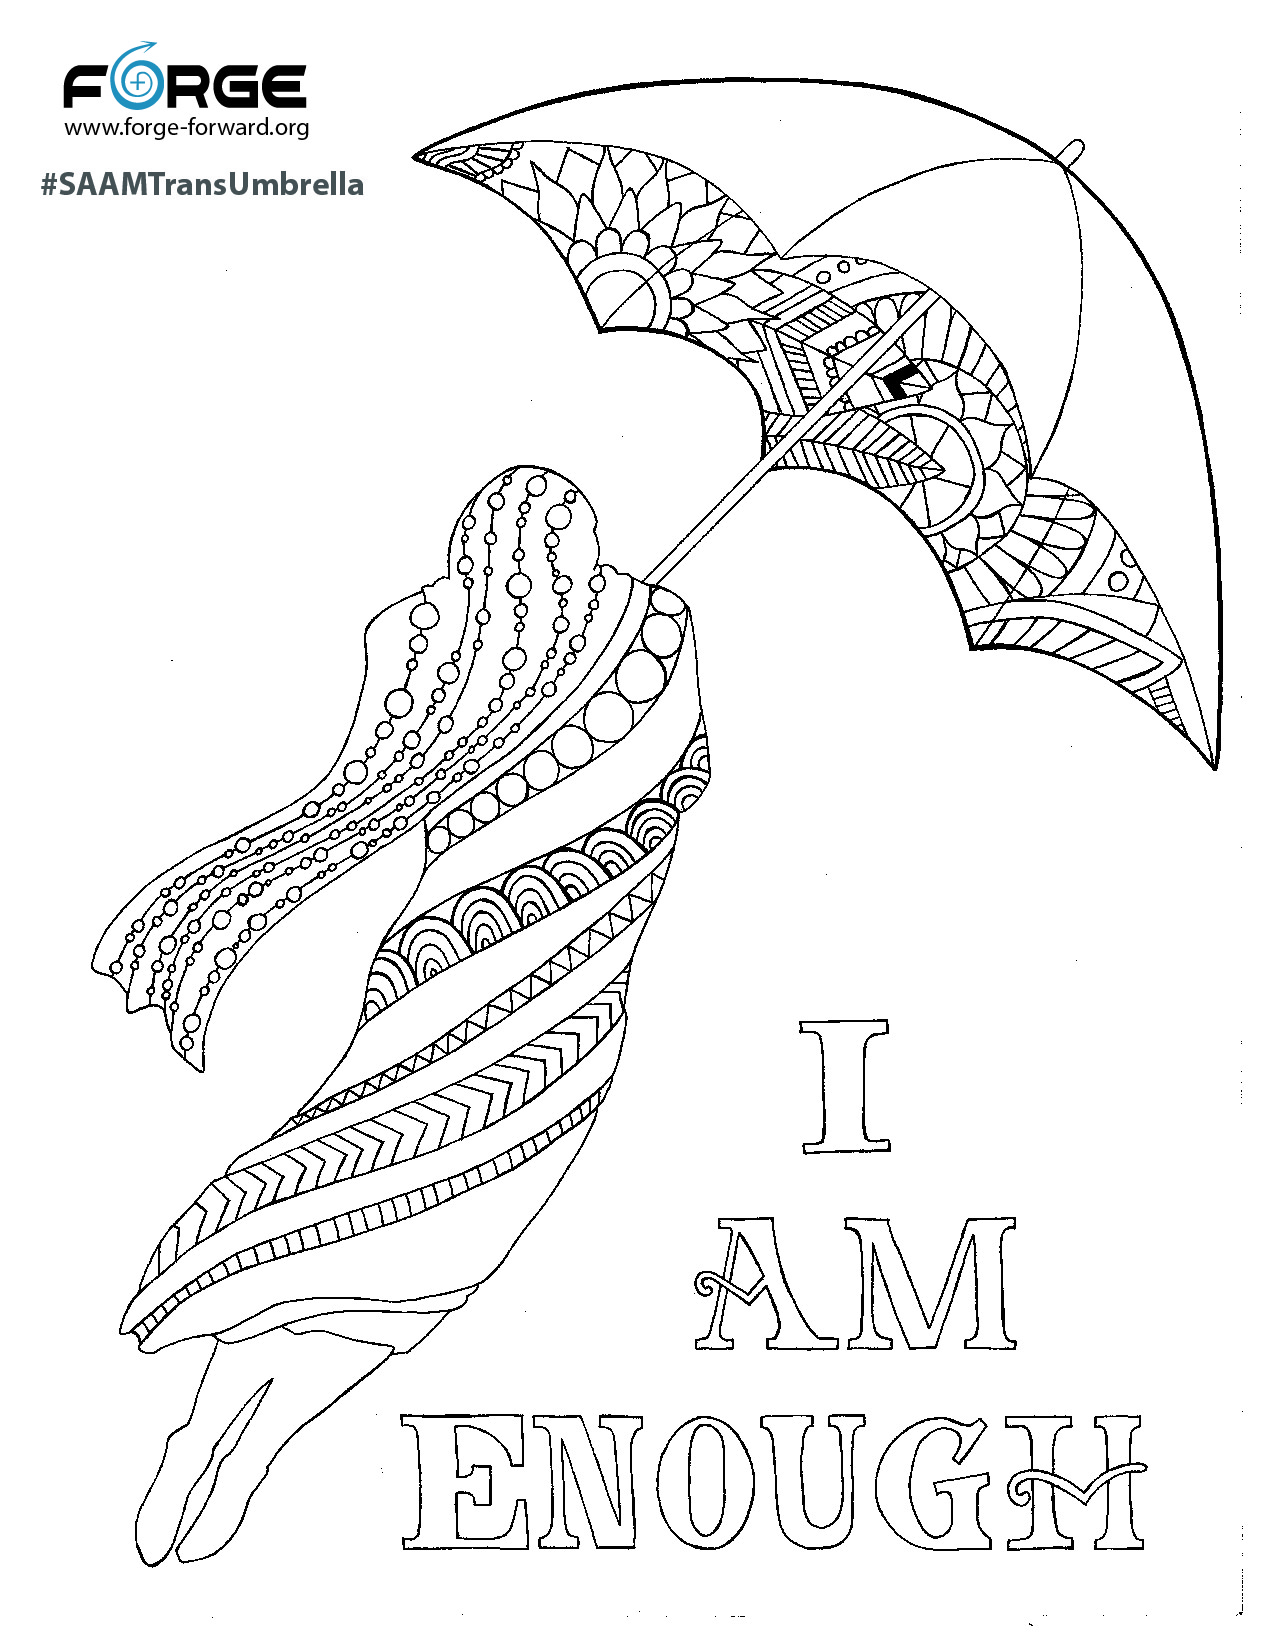 Saam Trans Umbrella Coloring Page Forge Transgender Pages Sarah Mcbride  People Male Female Hannah Winterbourne Candis Cayne Trump Nicole Maines —  oguchionyewu